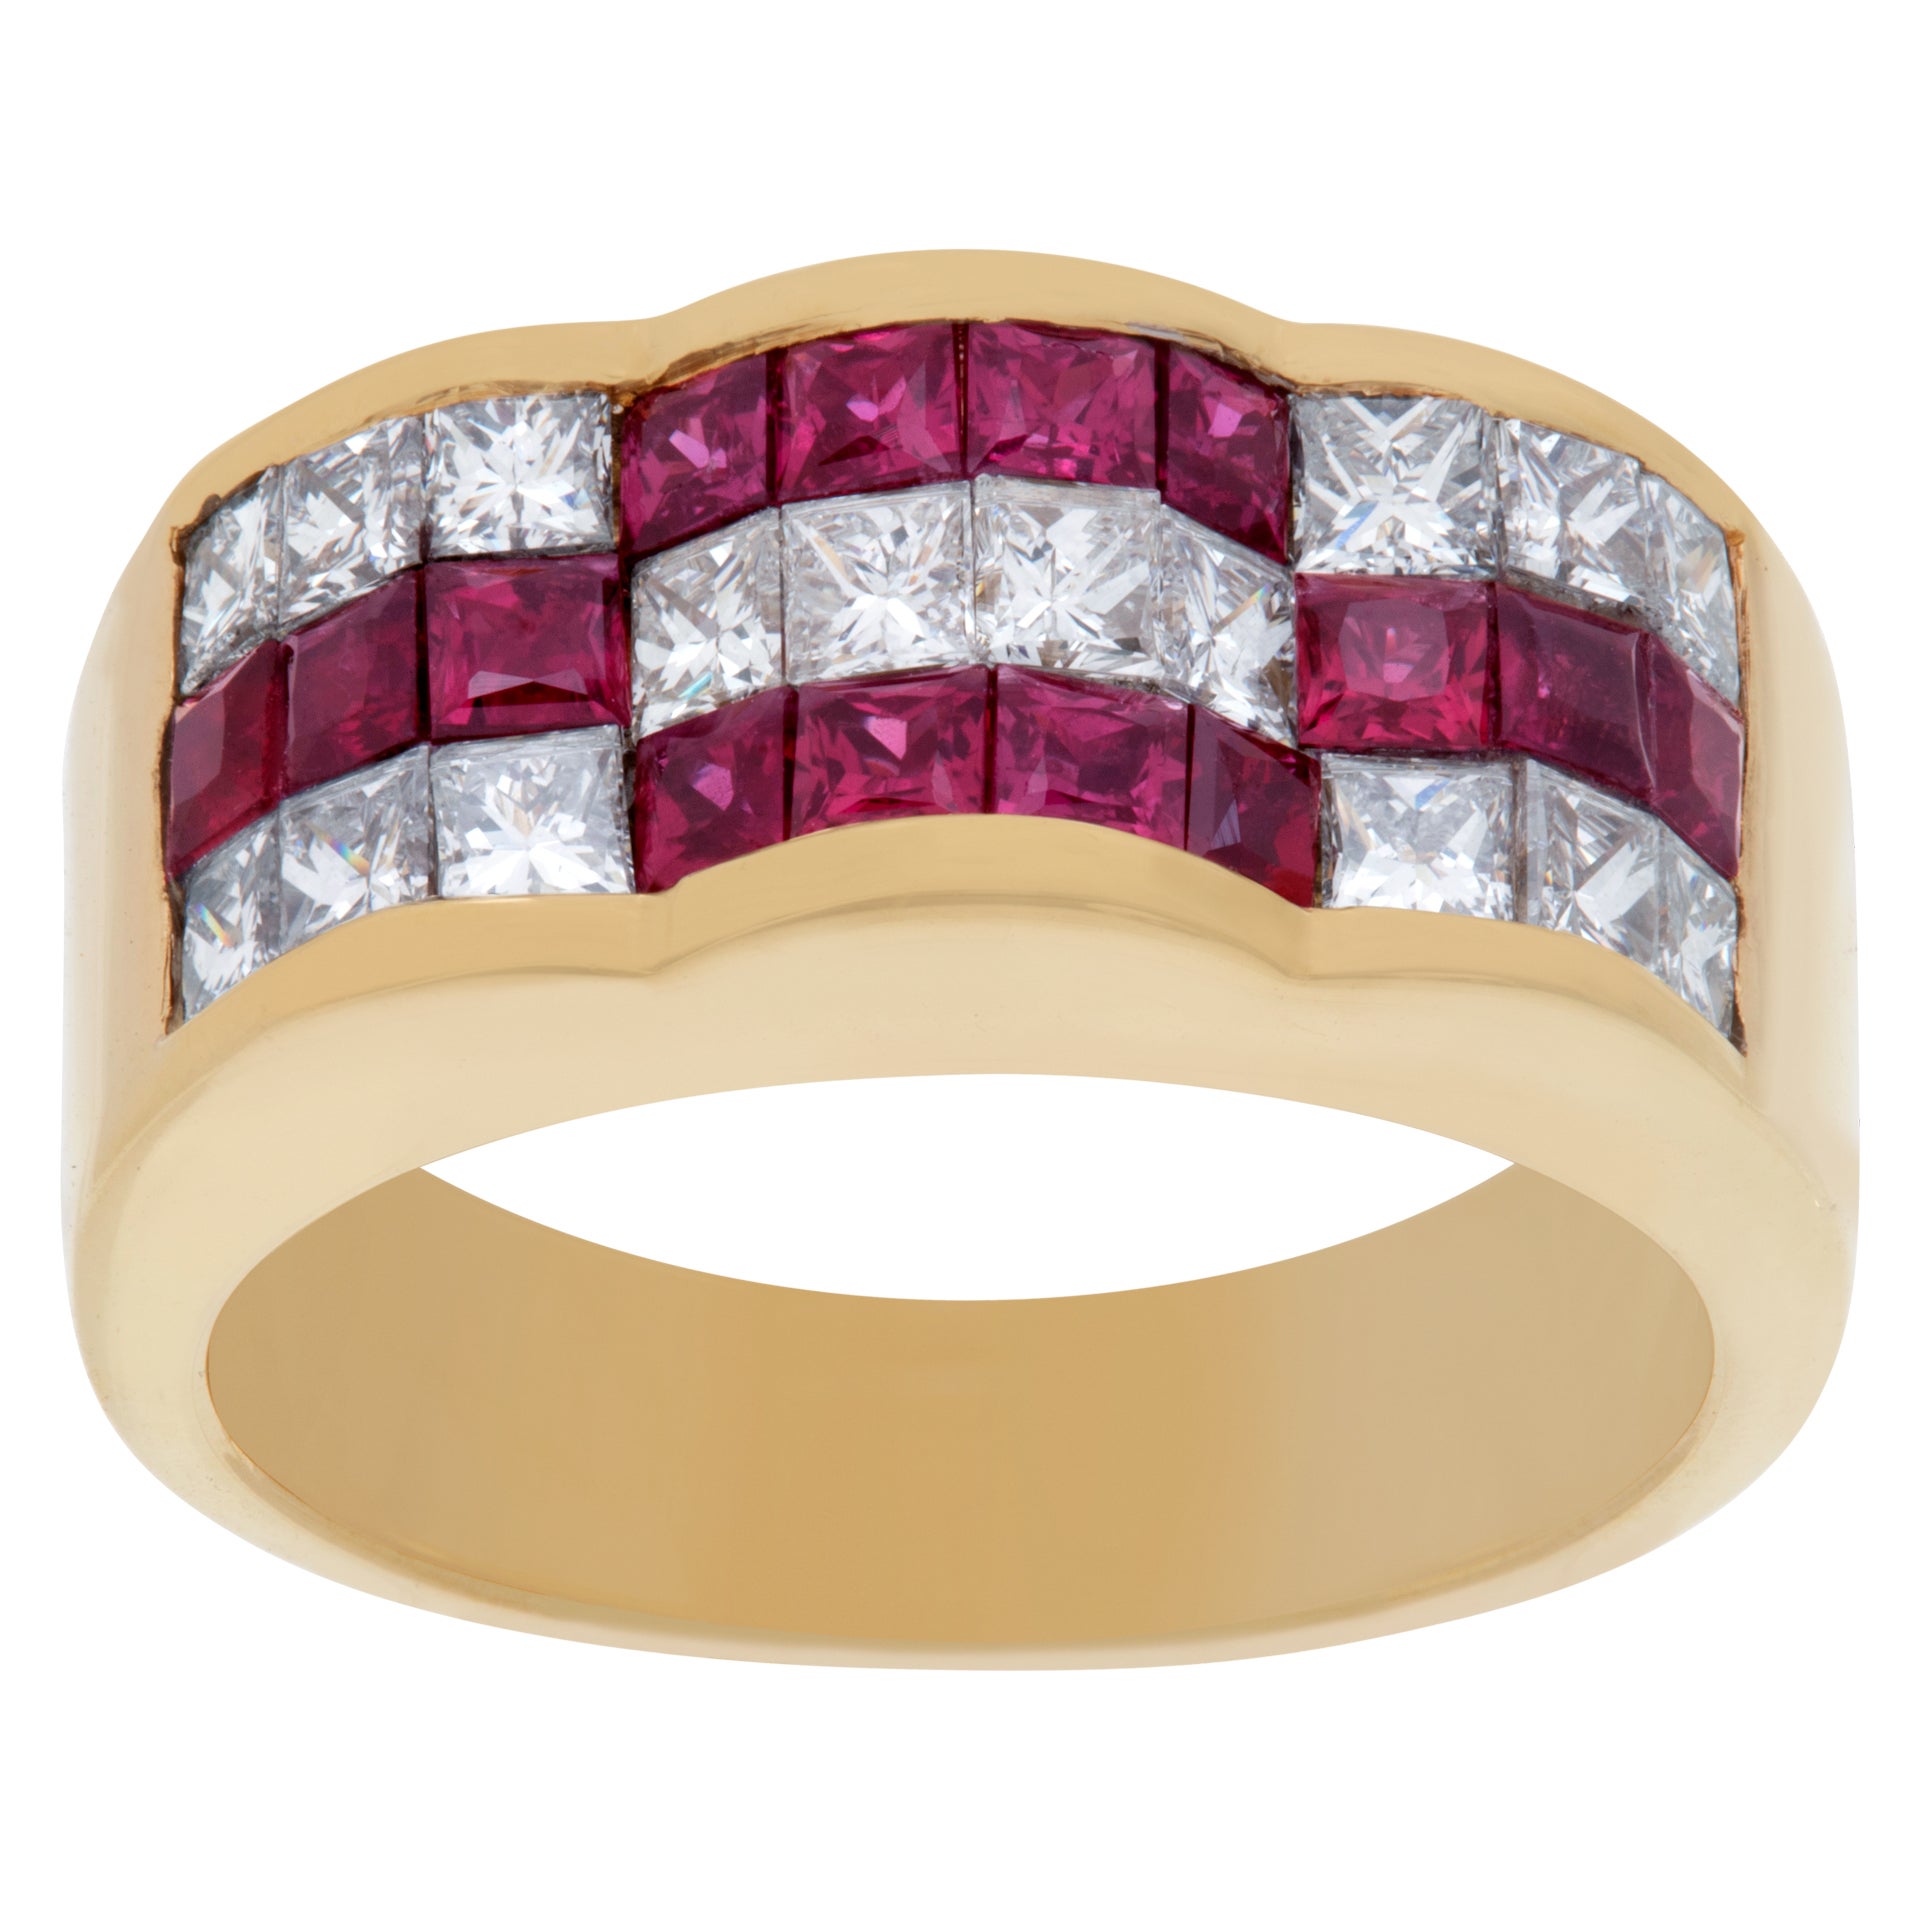 Channel Set Diamond and Ruby Ring in 18k Yellow Gold. 1.12 Carats in Diamonds